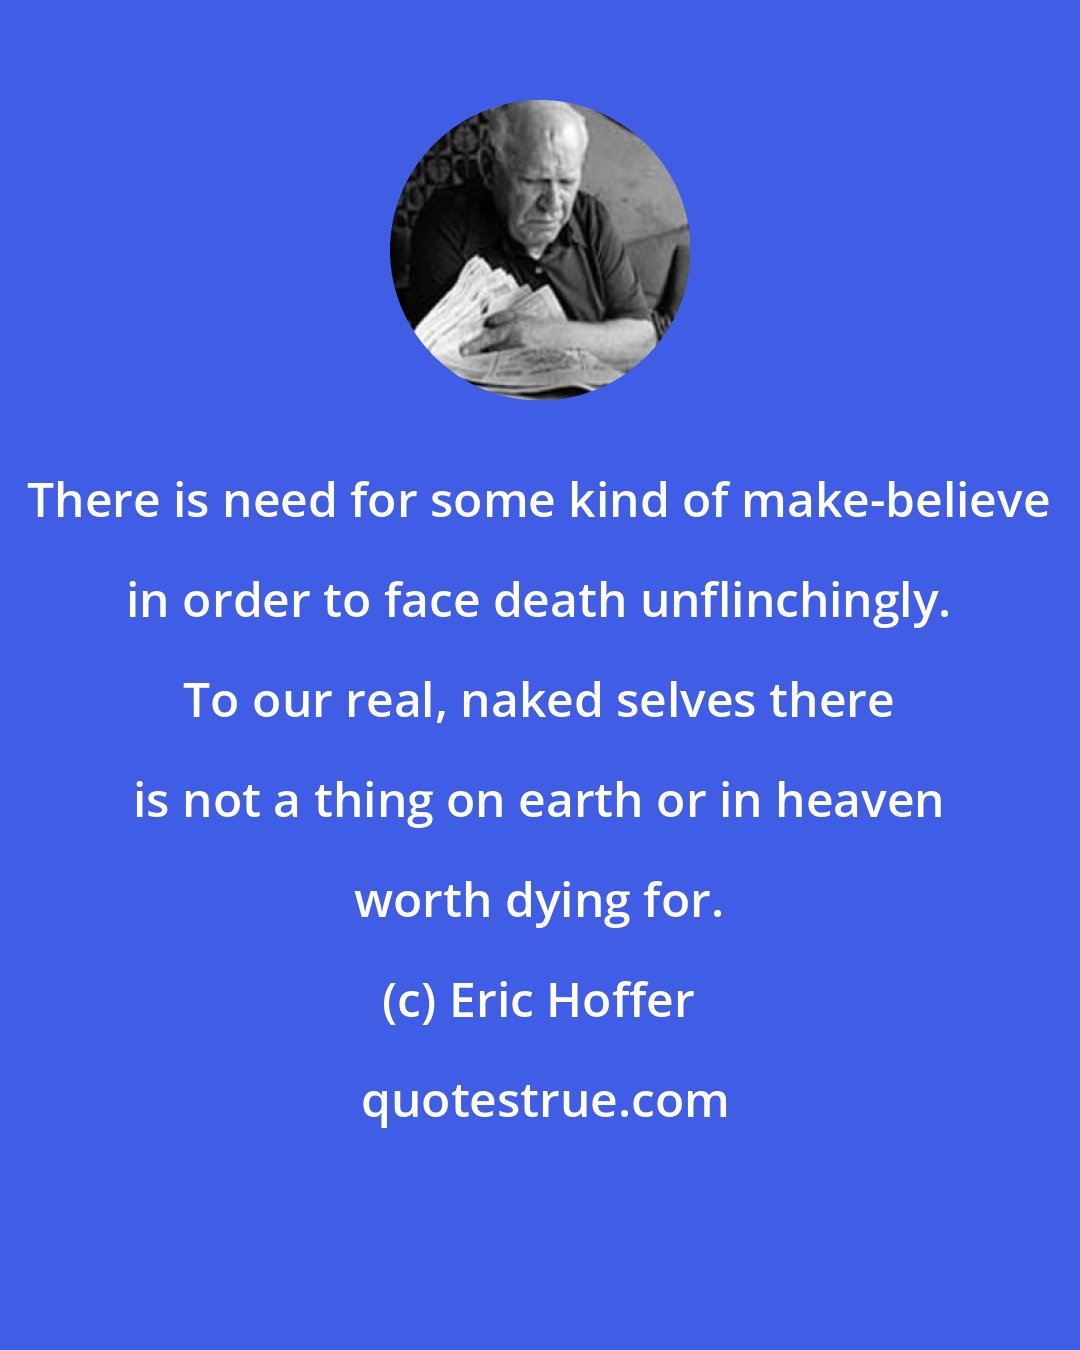 Eric Hoffer: There is need for some kind of make-believe in order to face death unflinchingly. To our real, naked selves there is not a thing on earth or in heaven worth dying for.